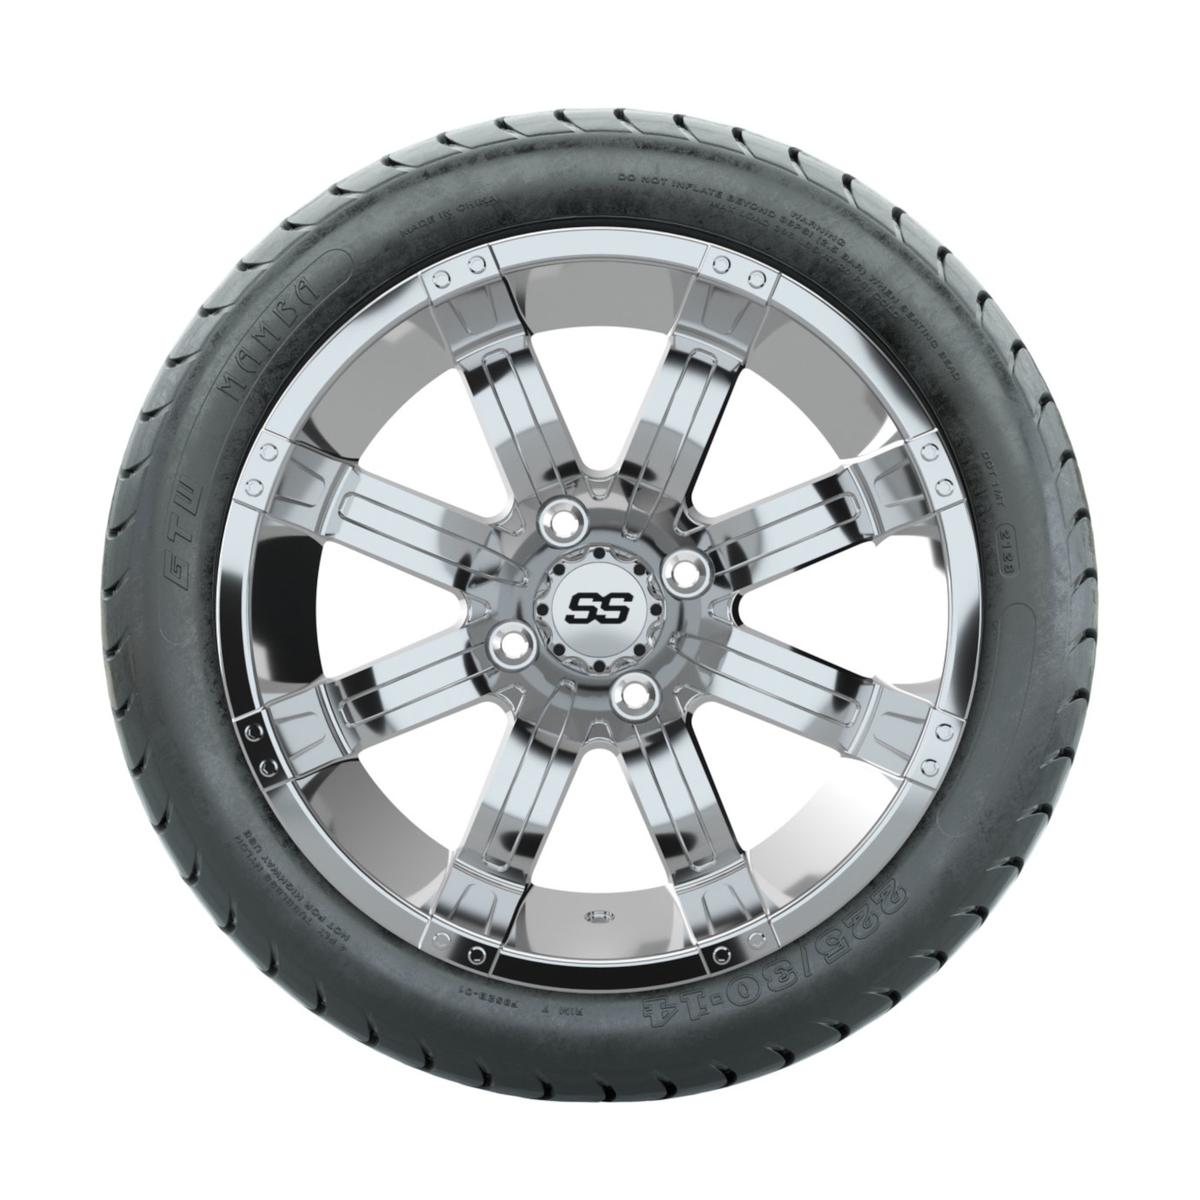 14” GTW Tempest Chrome Wheels with Mamba Street Tires – Set of 4